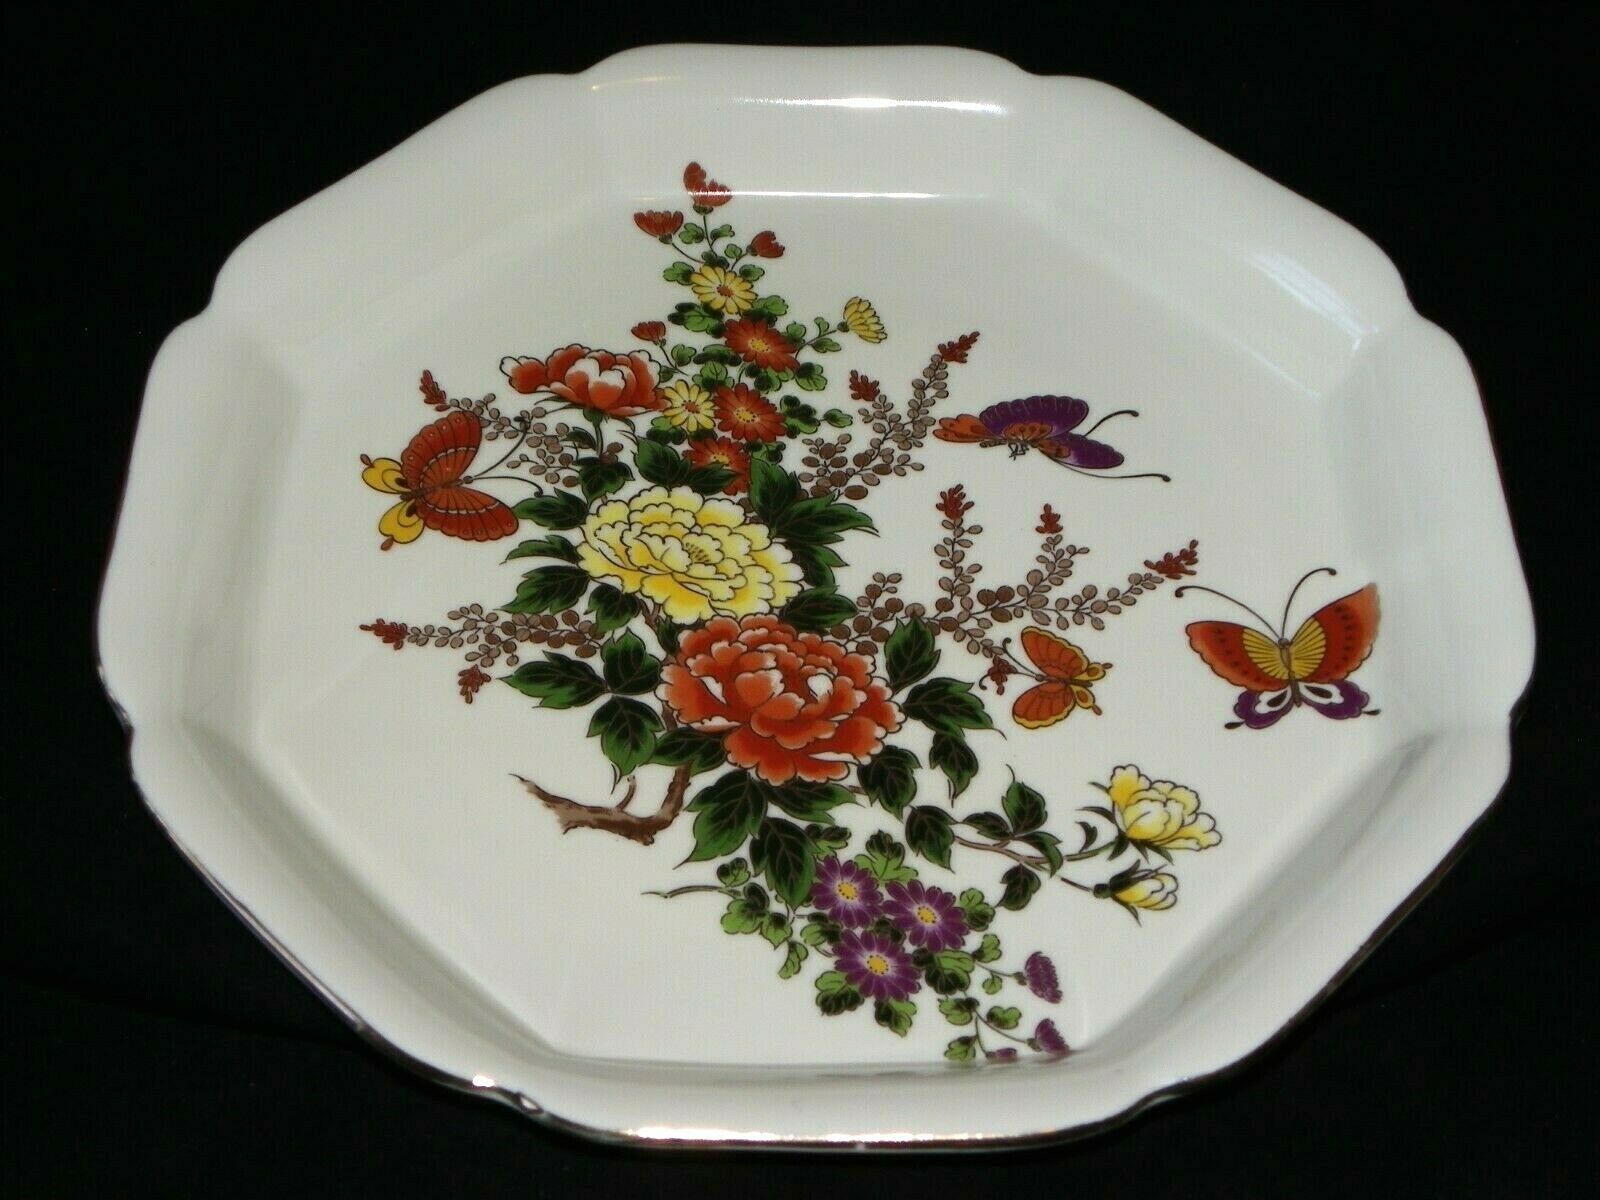 Otagiri 11.5" Platter with Flowers and Butterflies With Gold Trim Made in Japan - $34.99